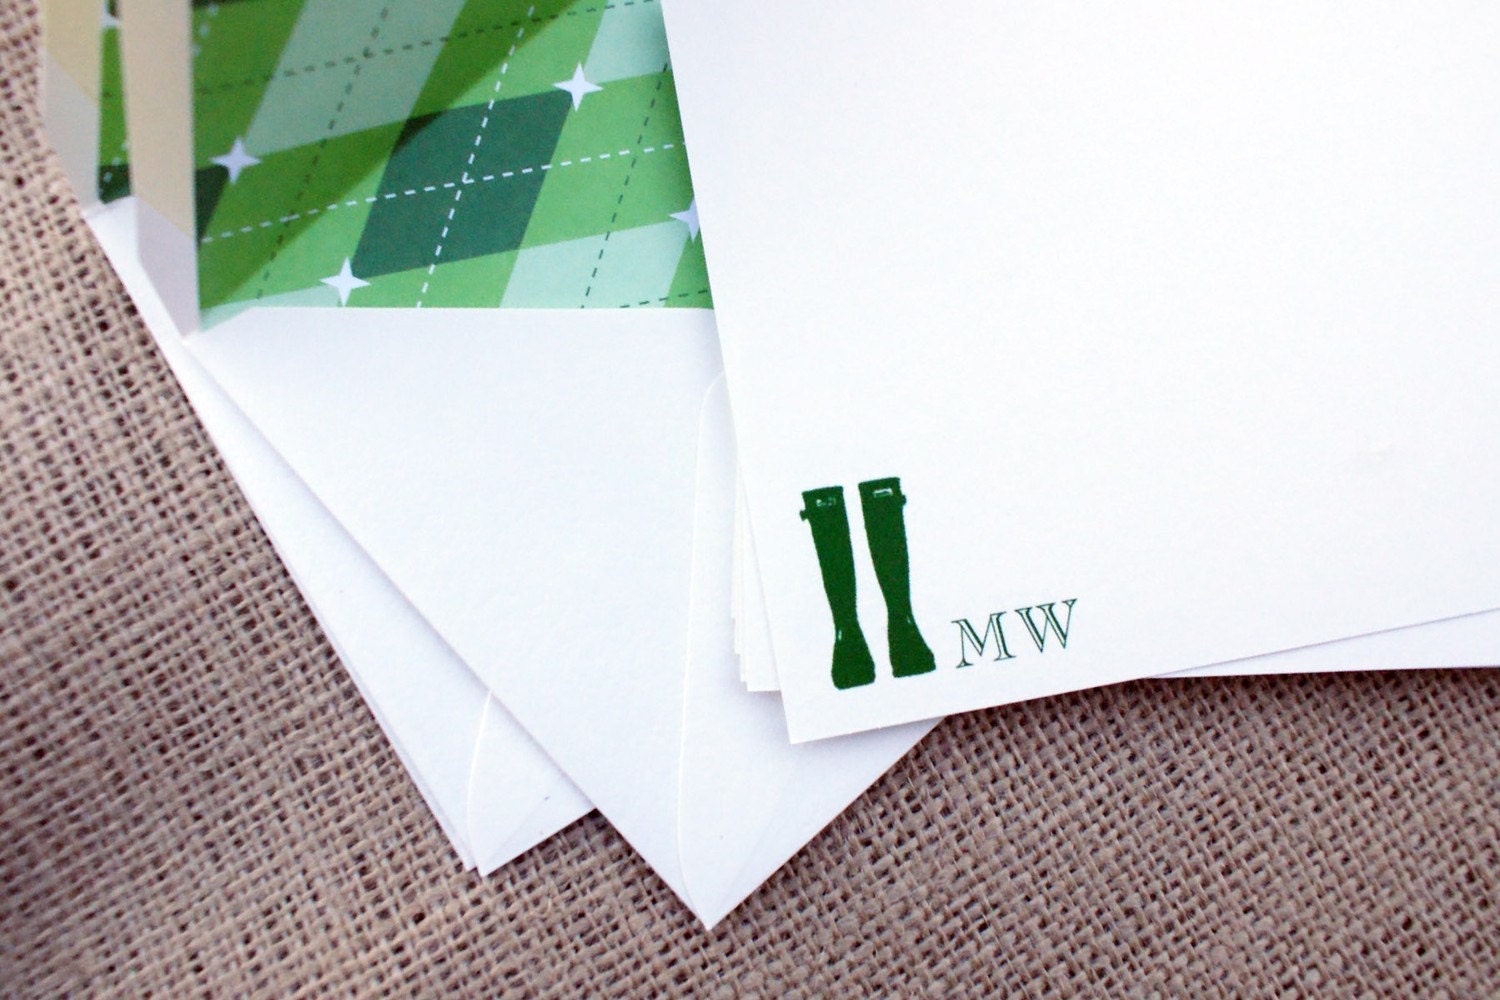 Wellies Note Cards with Argyle Patterned Envelope Liners - Personalized - Set of 8